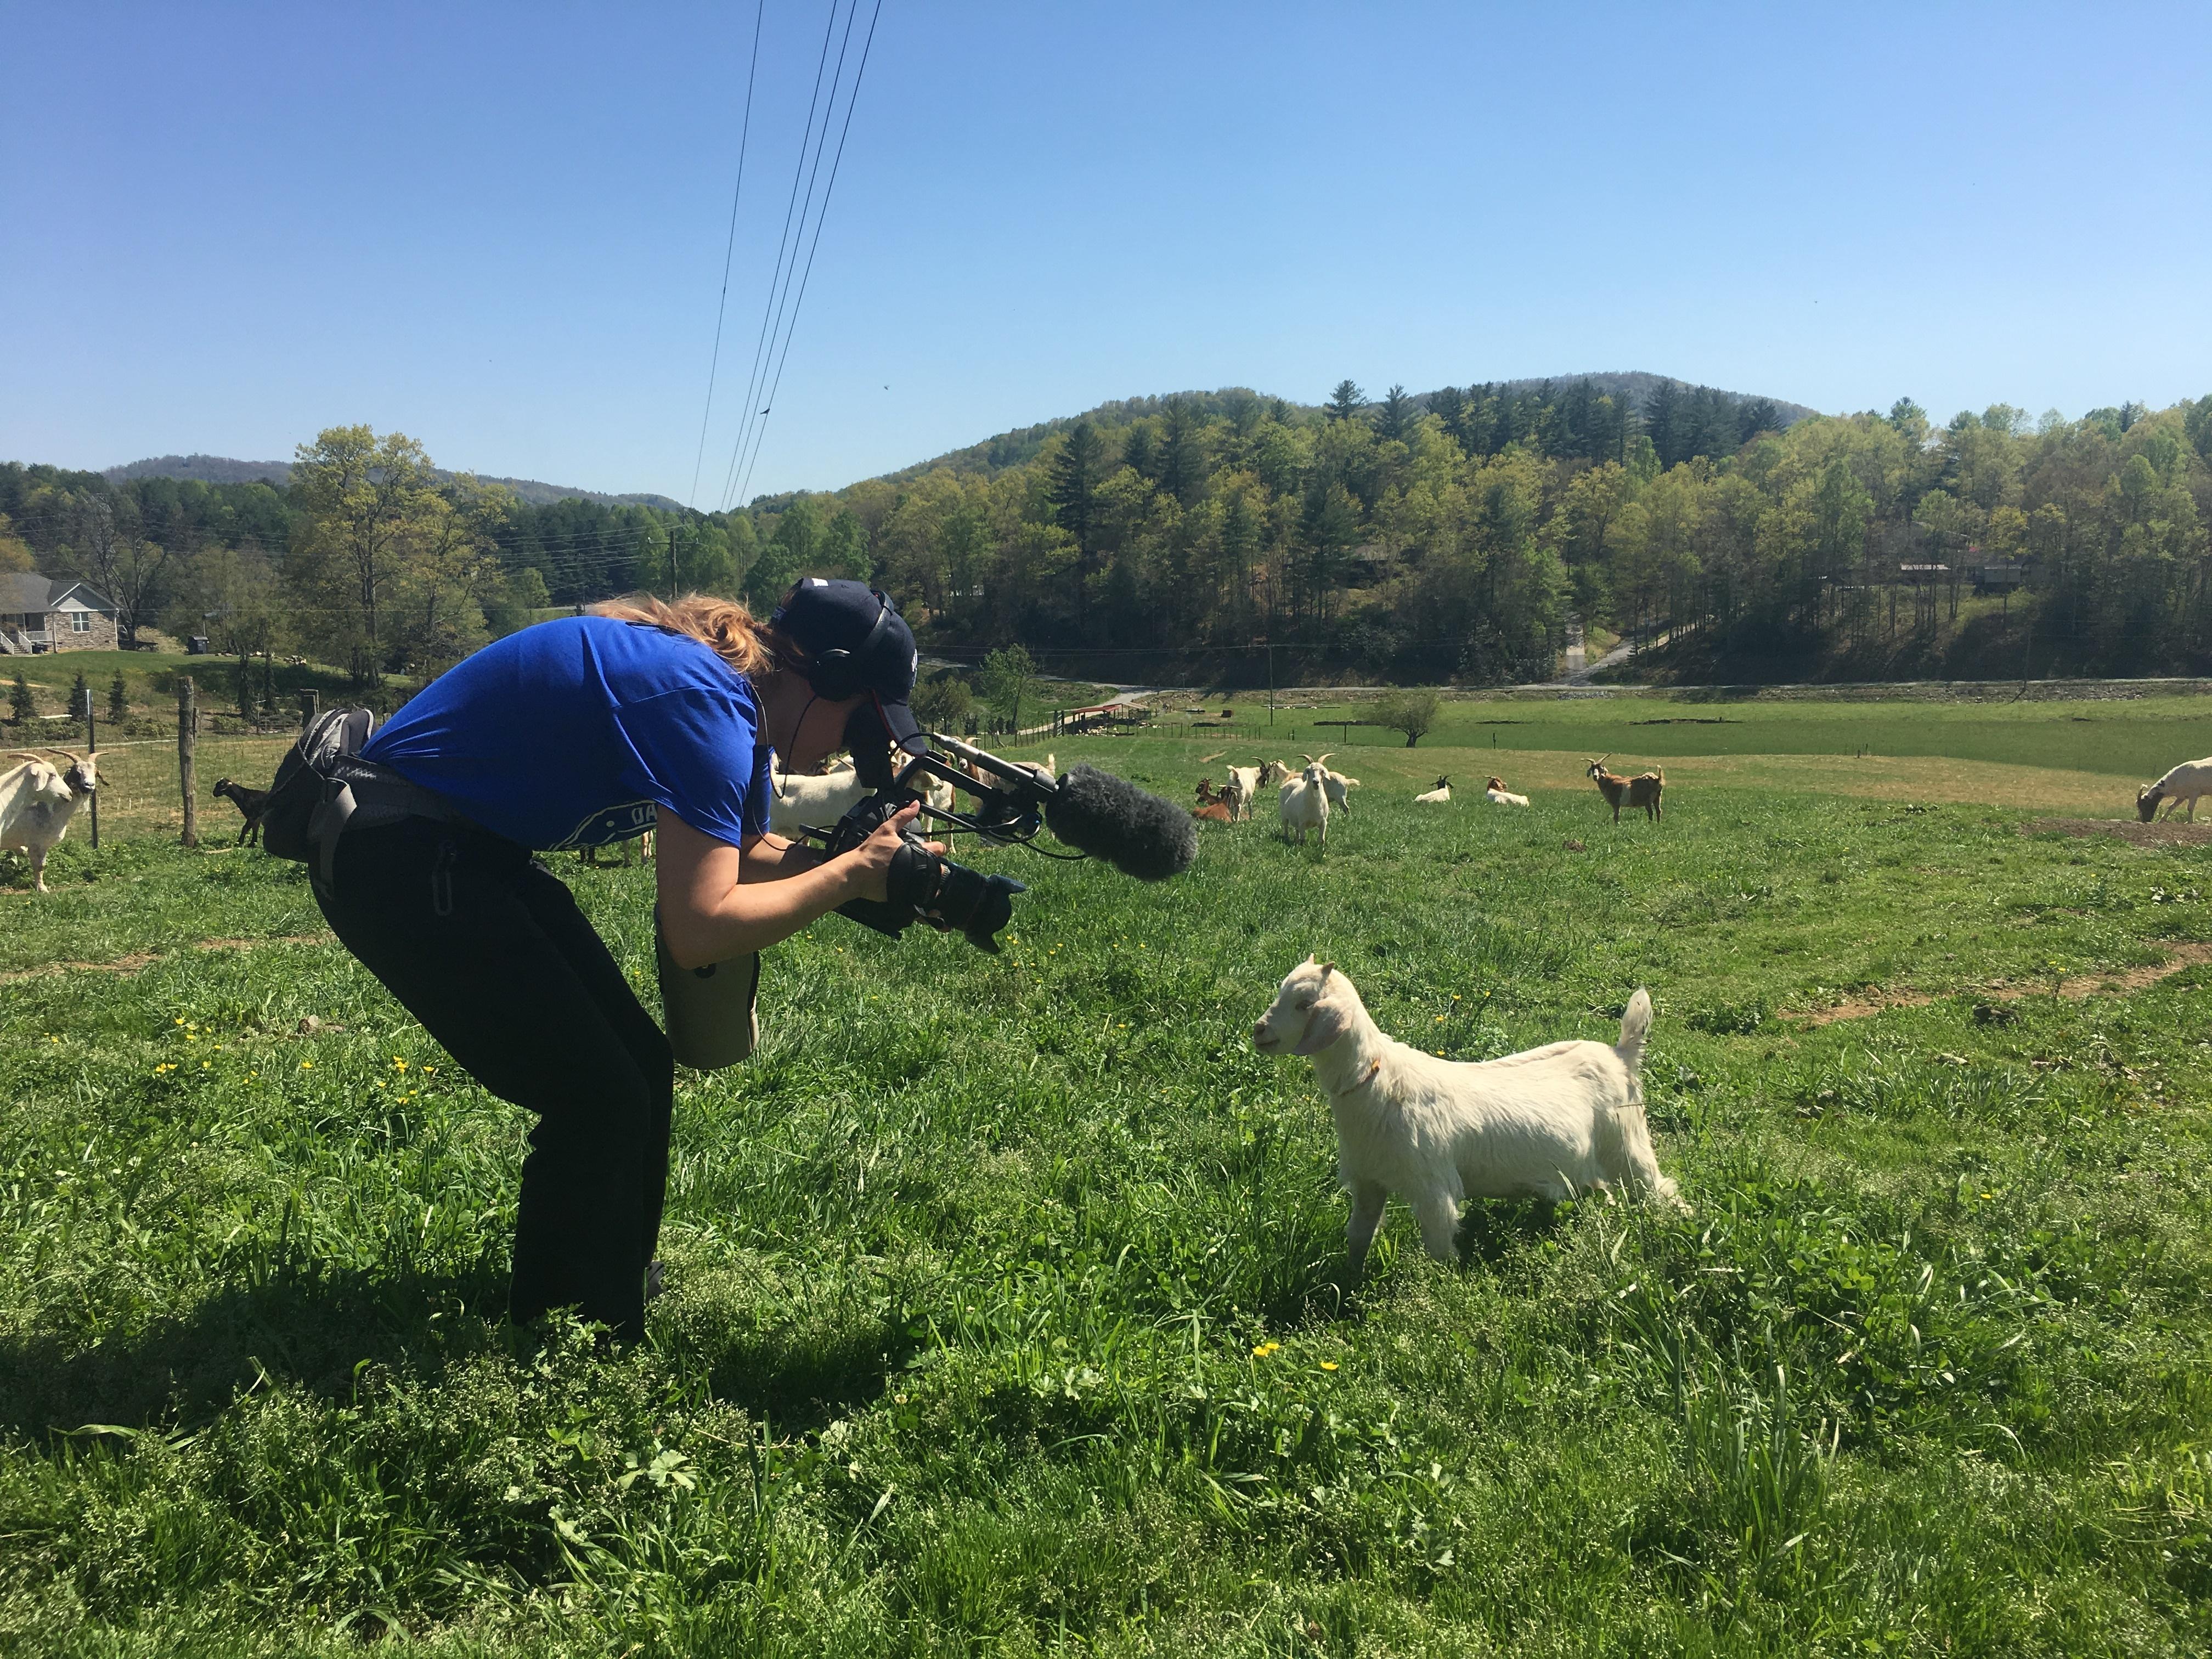 Blonde crew member kneels in front of goat while holding up a camera